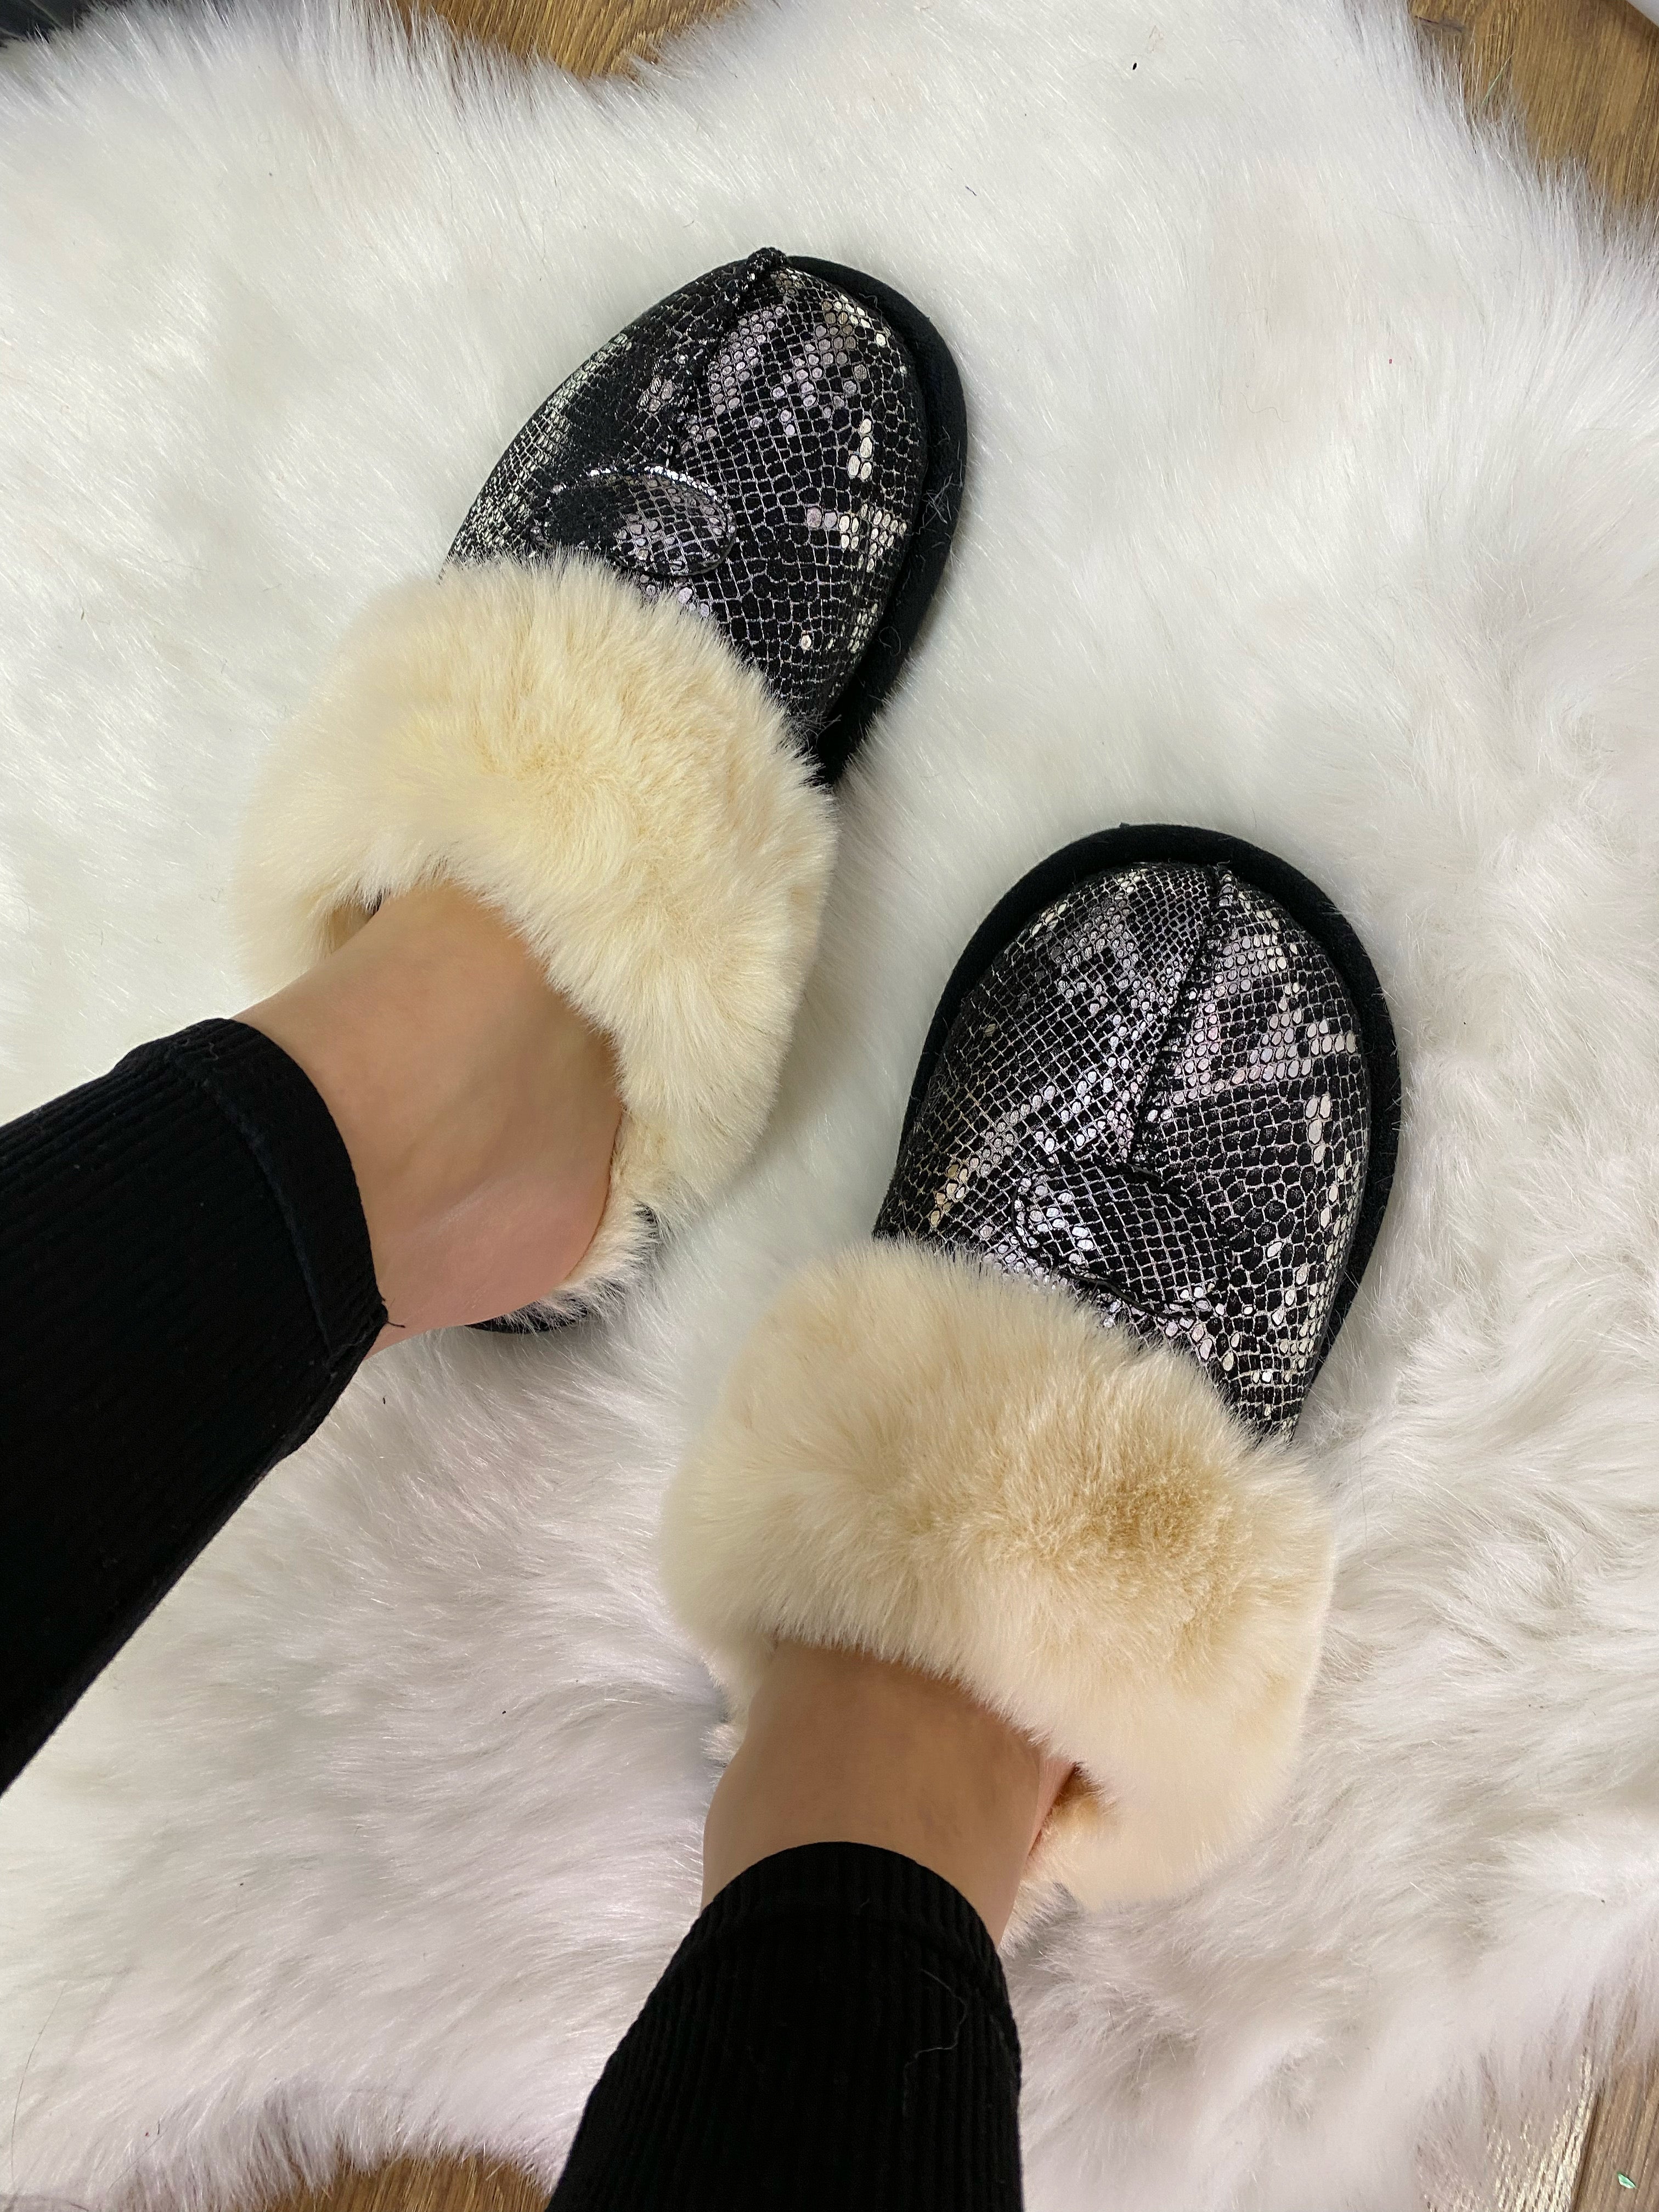 CLF Fluff'd Up Slippers in Black | SAVAGE X FENTY